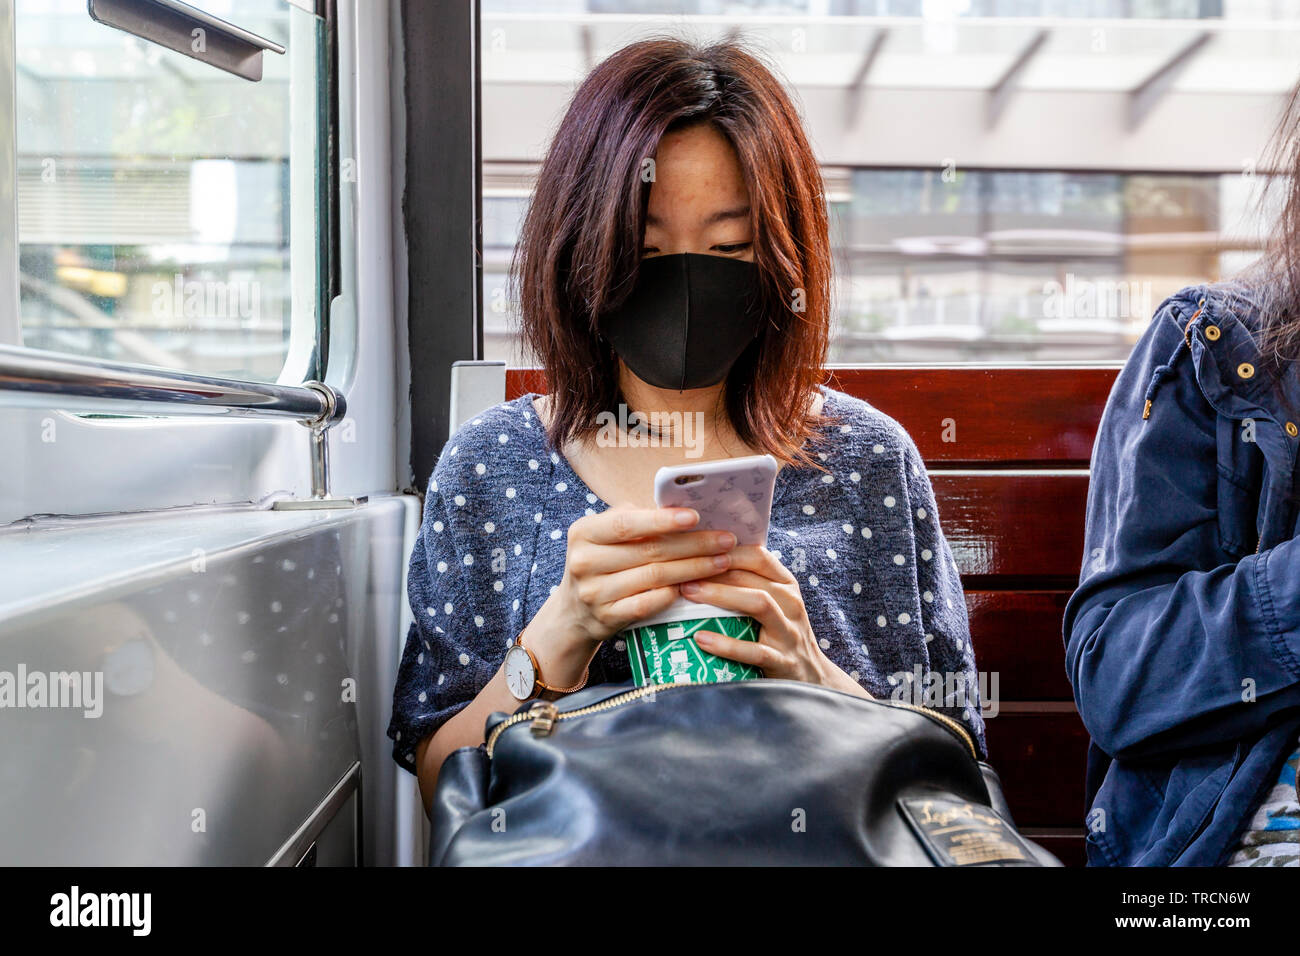 A Woman Wearing A Face Mask Sitting On A Tram Looking At Her Smartphone, Hong Kong, China Stock Photo